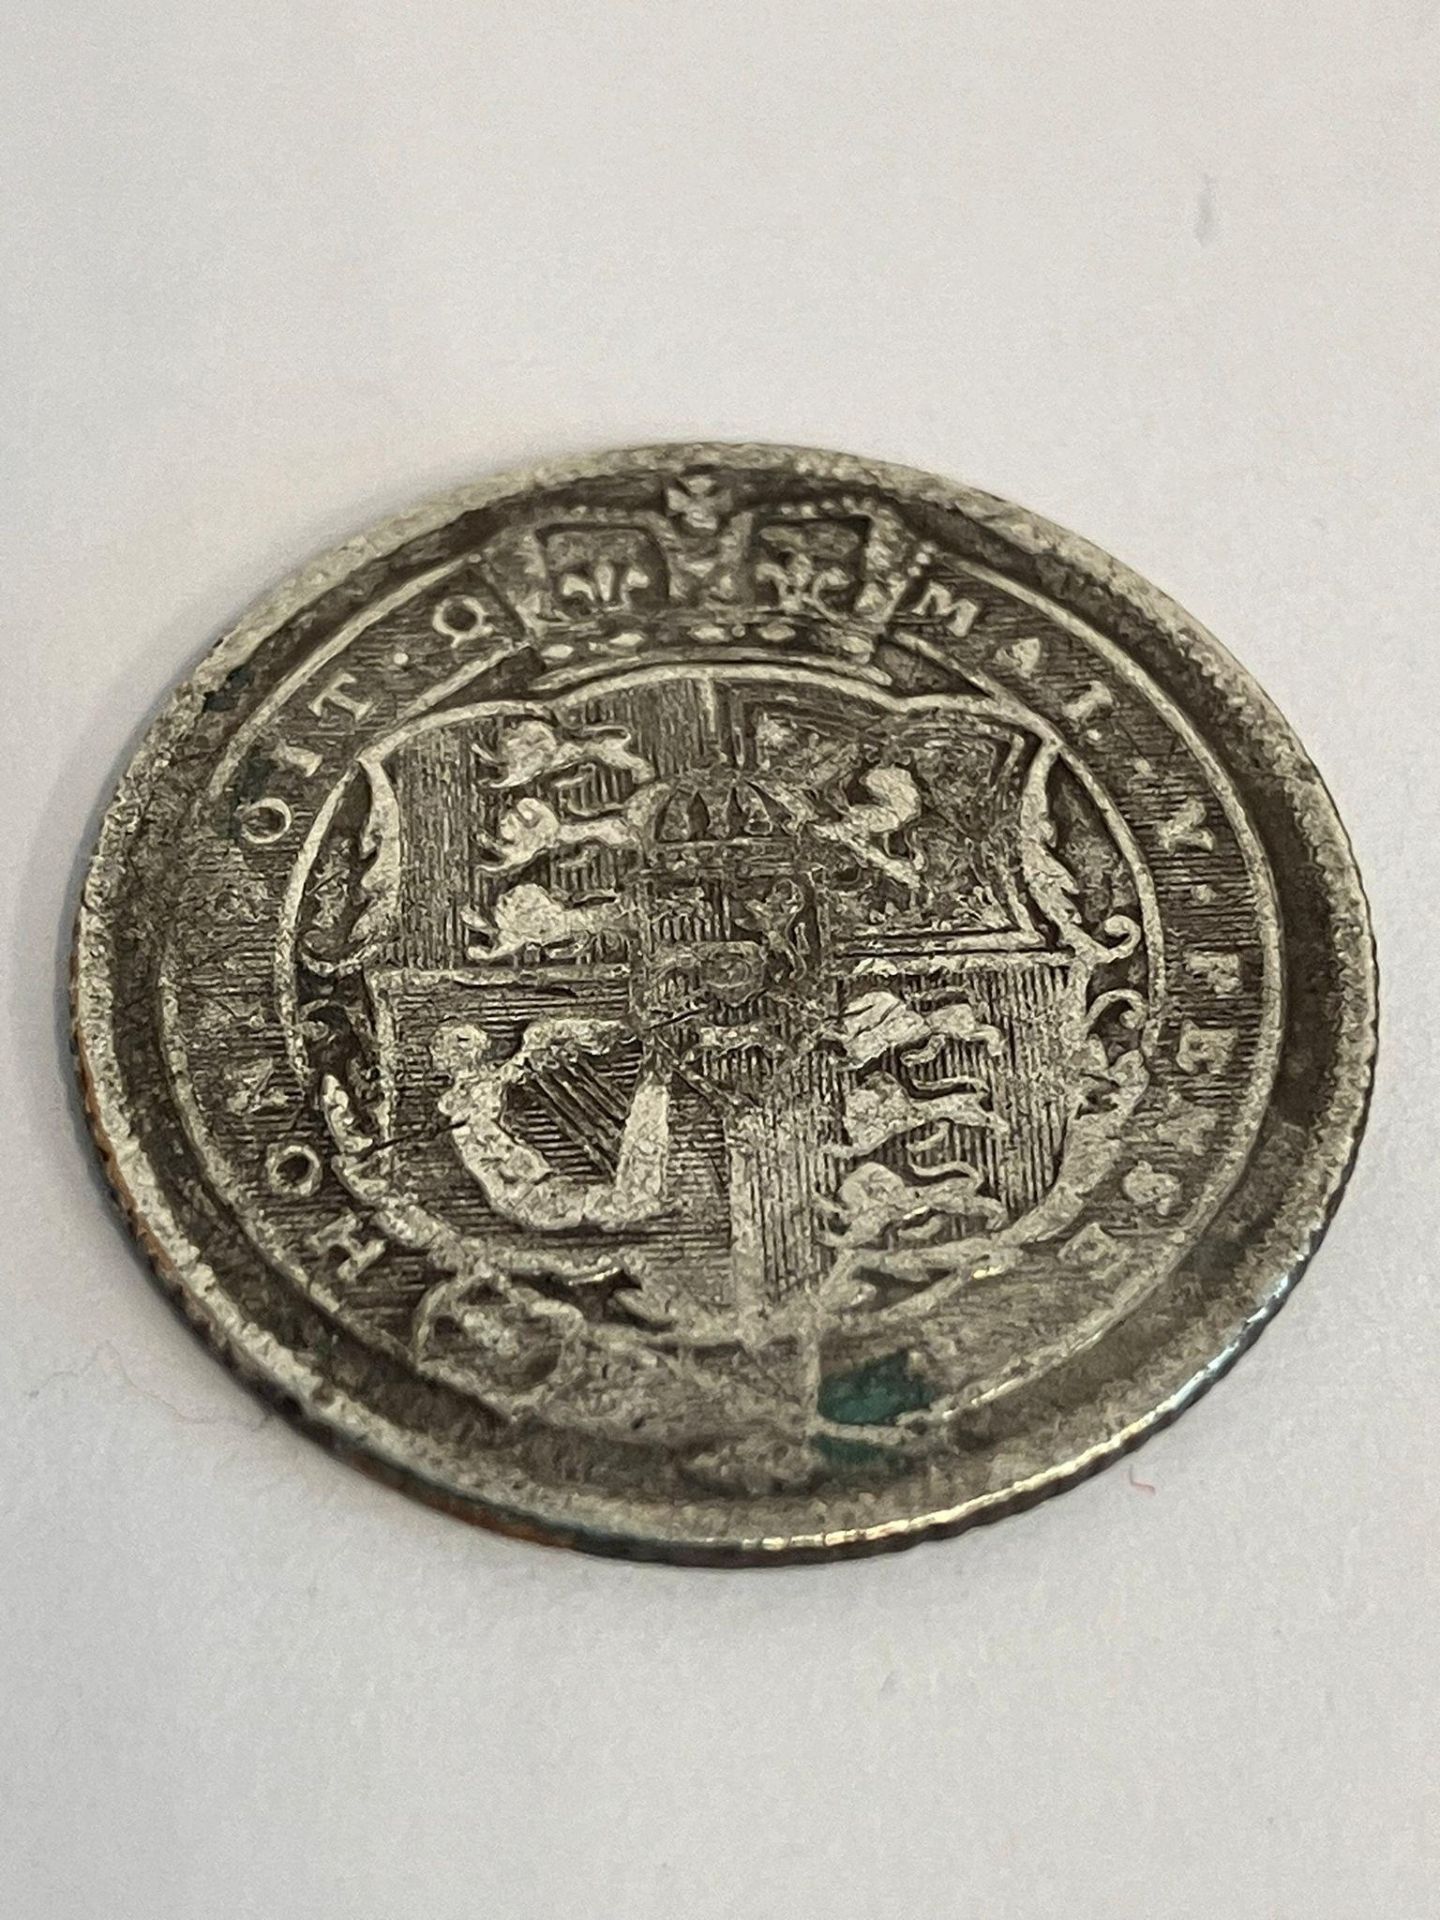 1818 GEORGE III SILVER SIXPENCE. condition fine/very fine, could use a clean. - Bild 2 aus 3